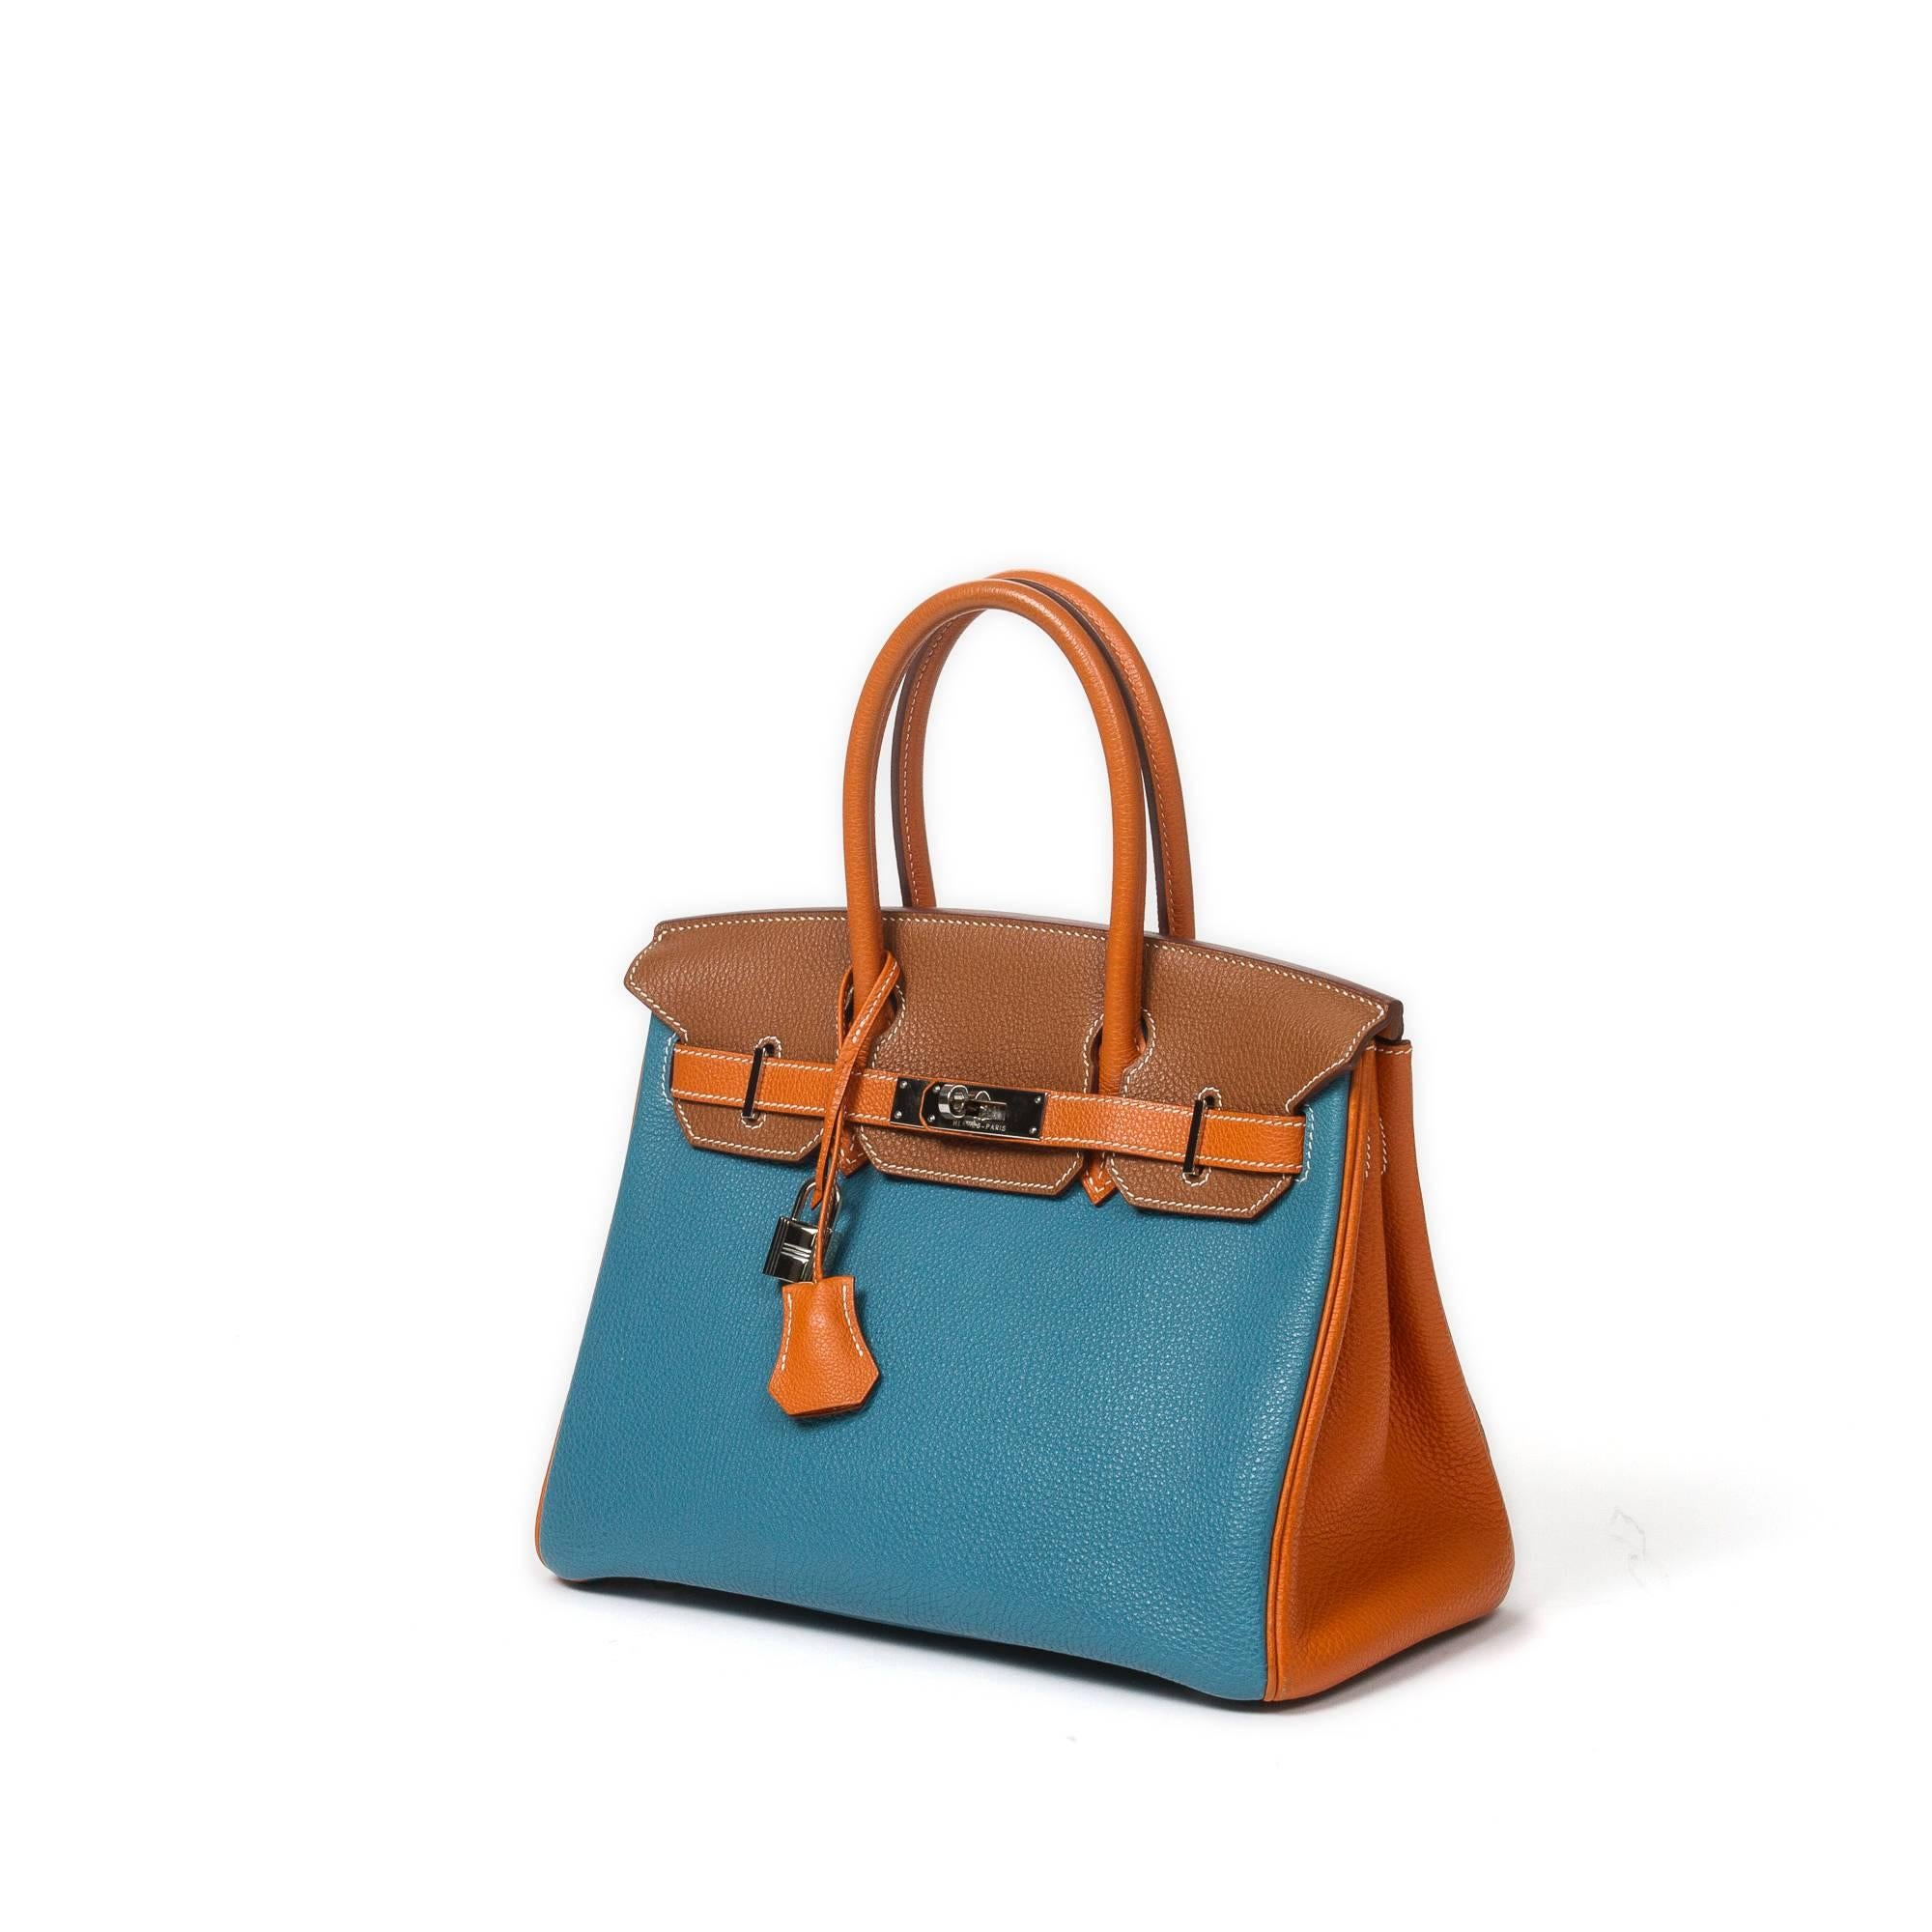 Hermès Special Order Tricolor Birkin 30cm in Bleu Jean, Orange and Alzean Togo leather, white stichings and silver tone hardware. Cadenas, mini pouch and keys in clochette. Orange chèvre leather interior with one slip and one zip pocket. Stamp N